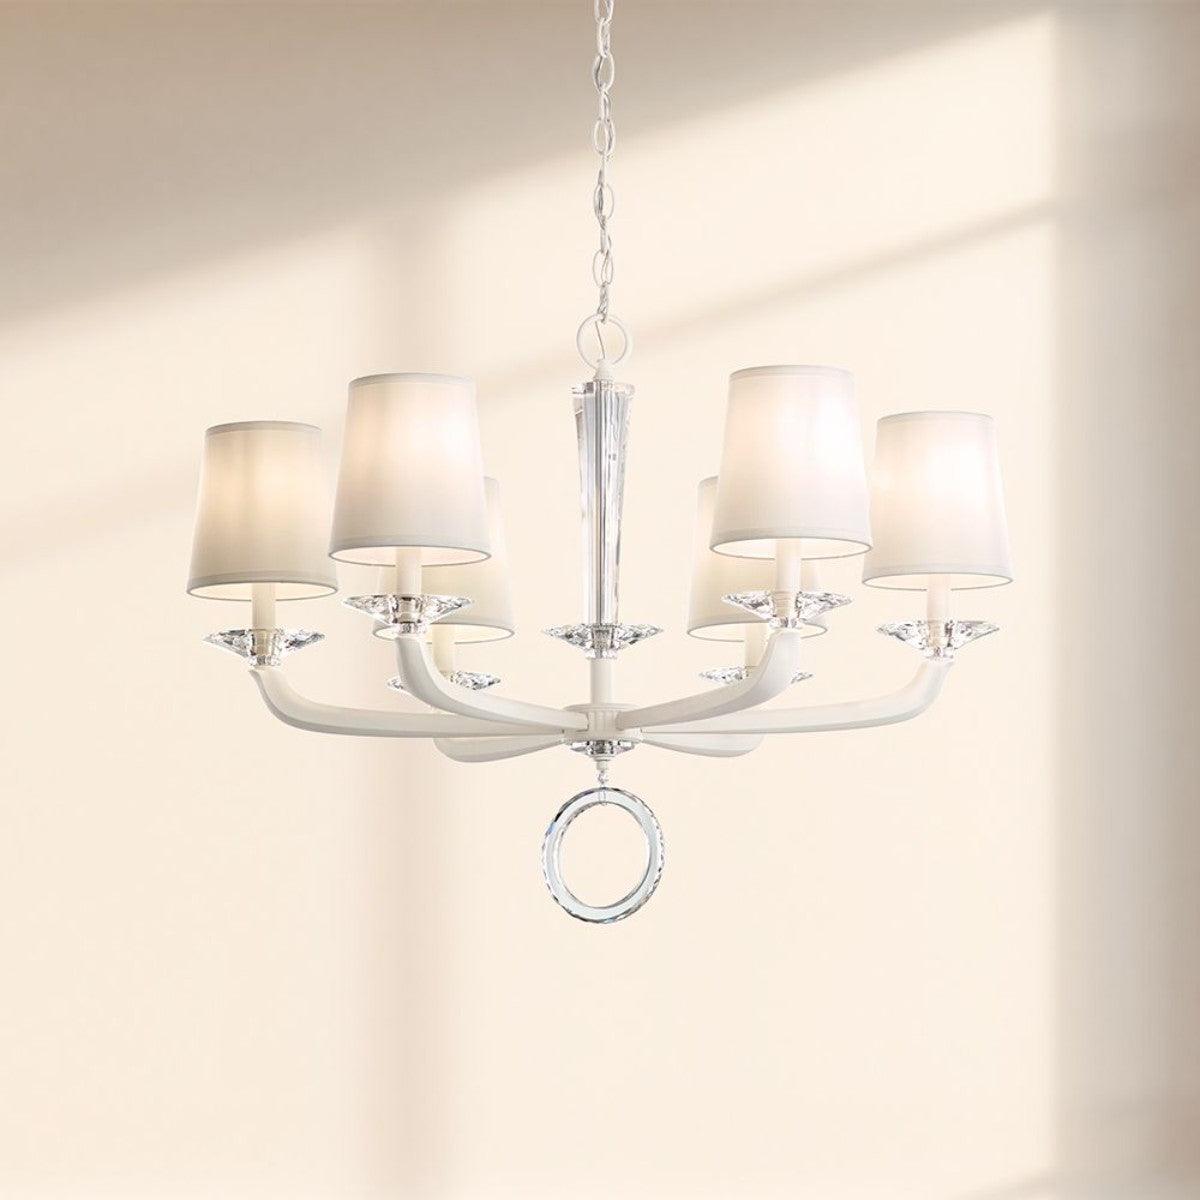 Emilea 31 inch 6 Lights Chandelier with Clear Optic Crystals